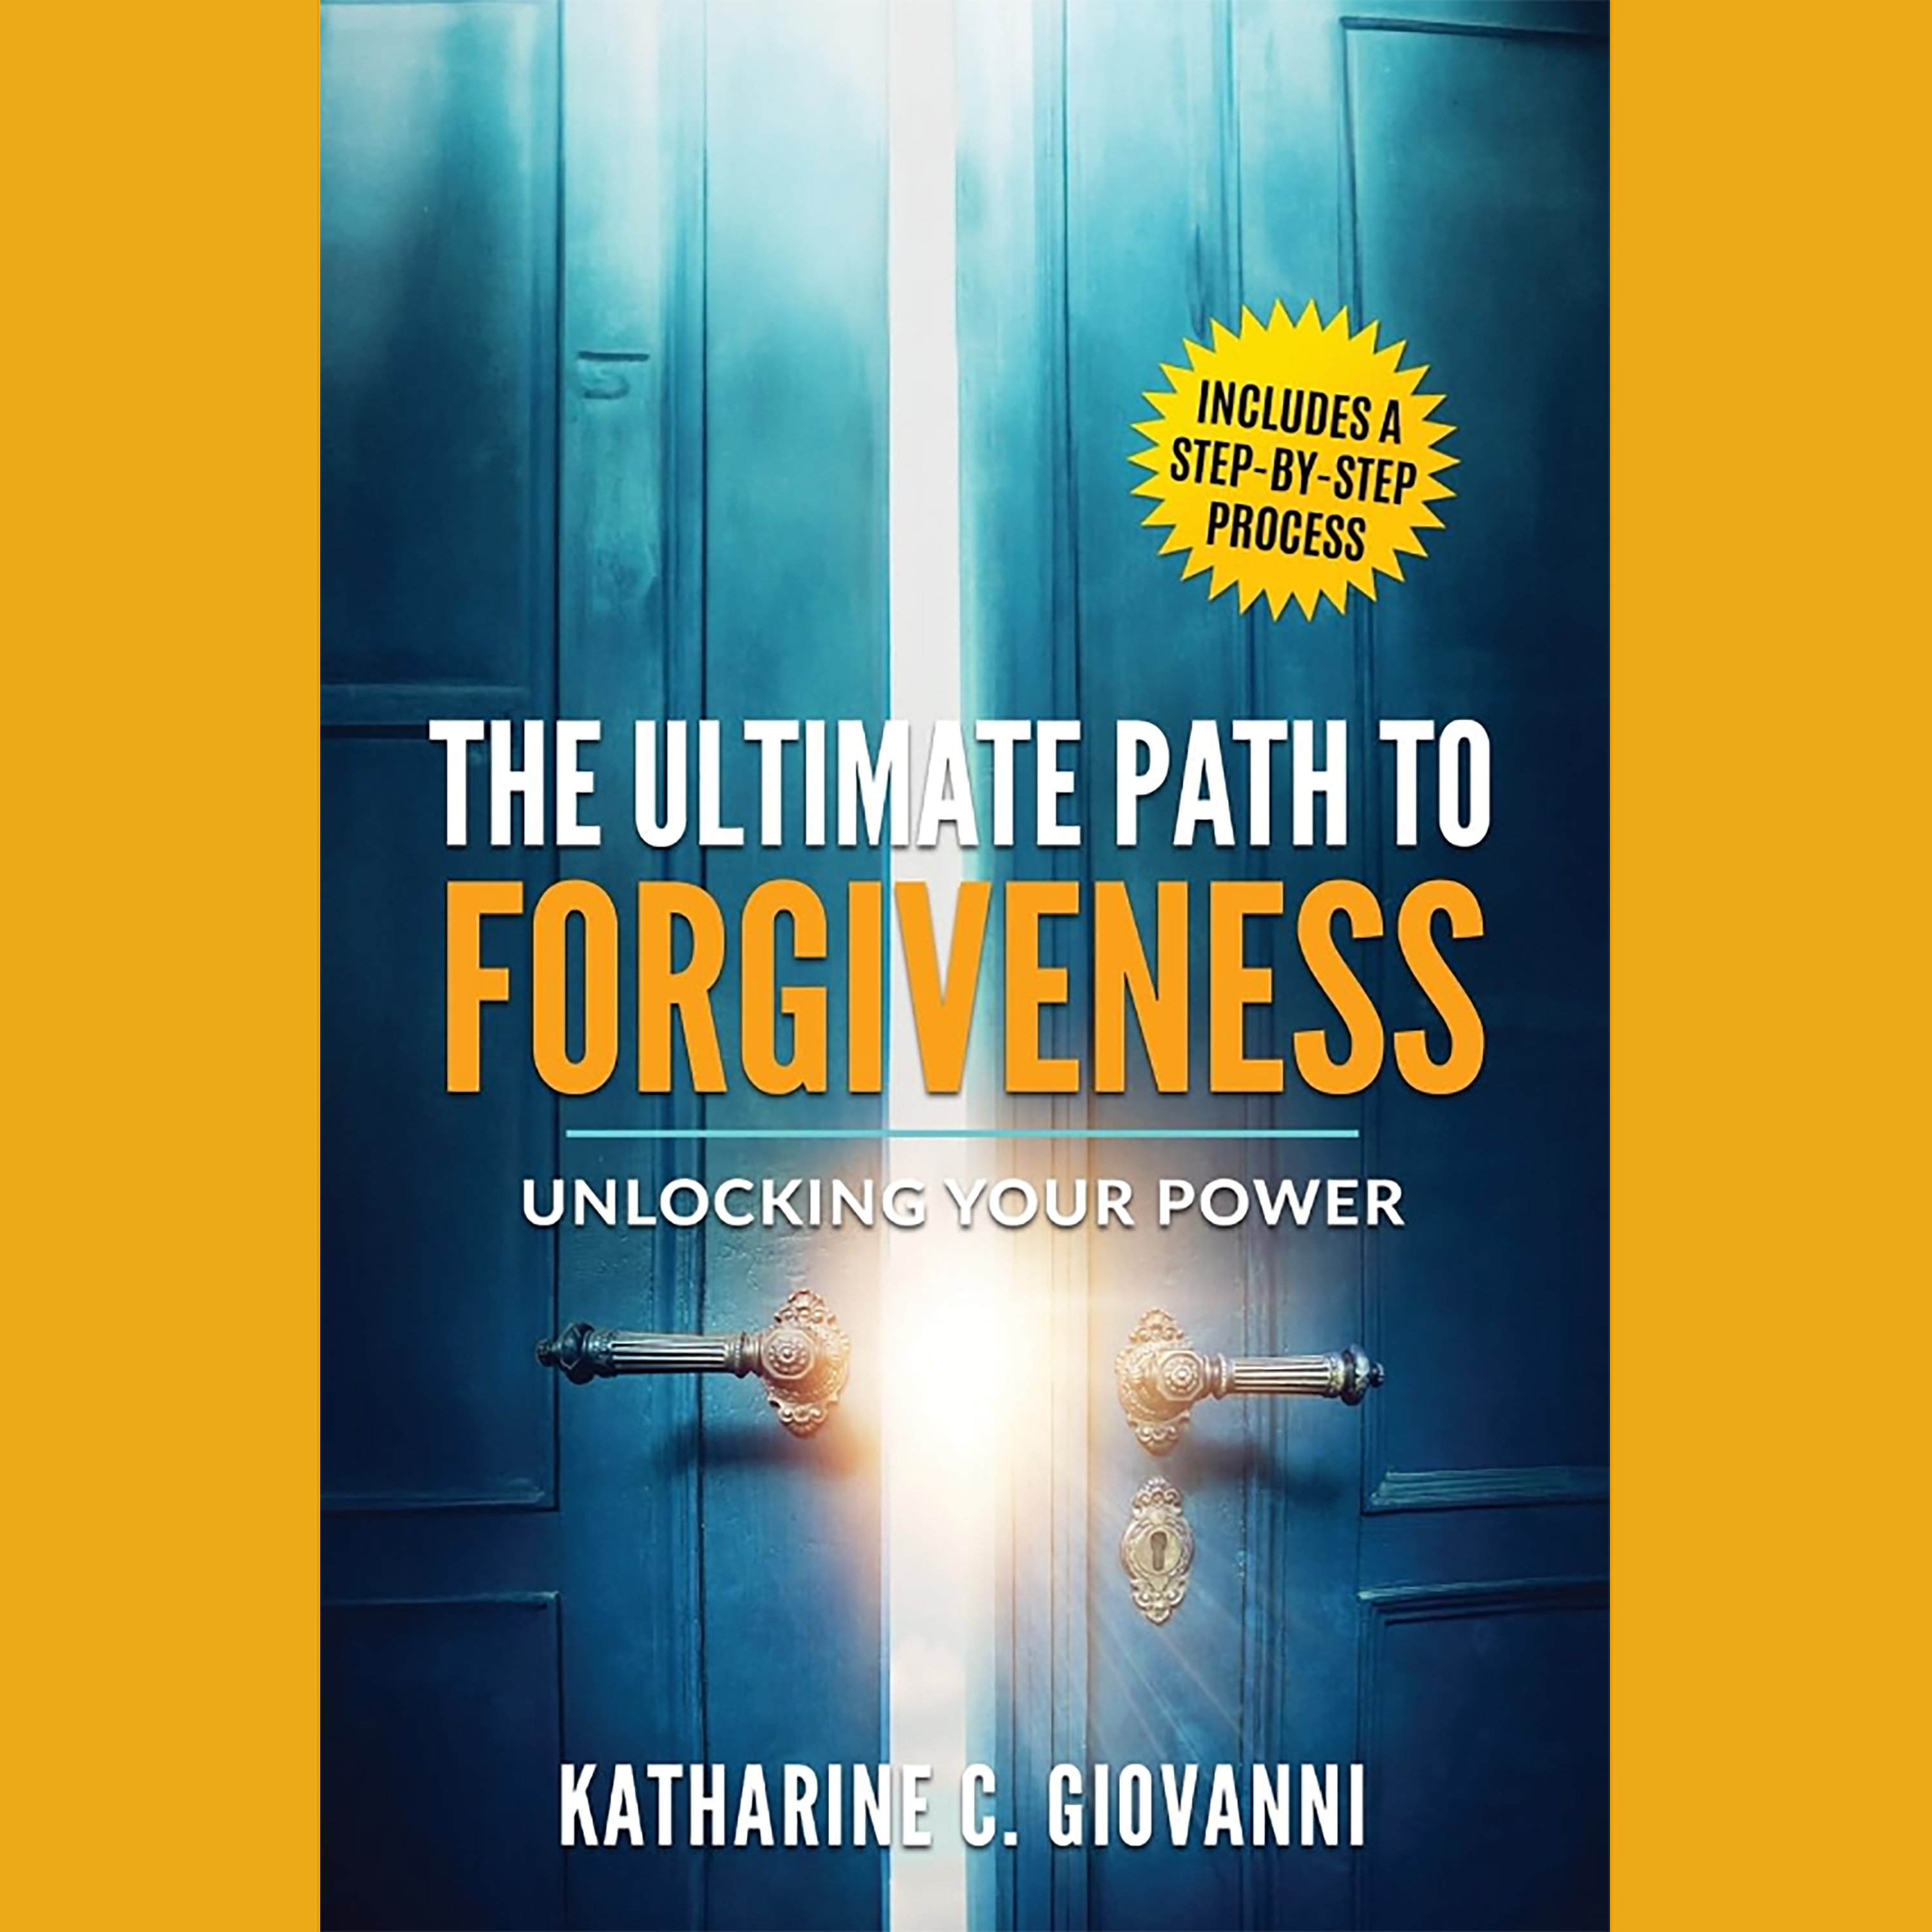 How Forgiveness Gives You Power